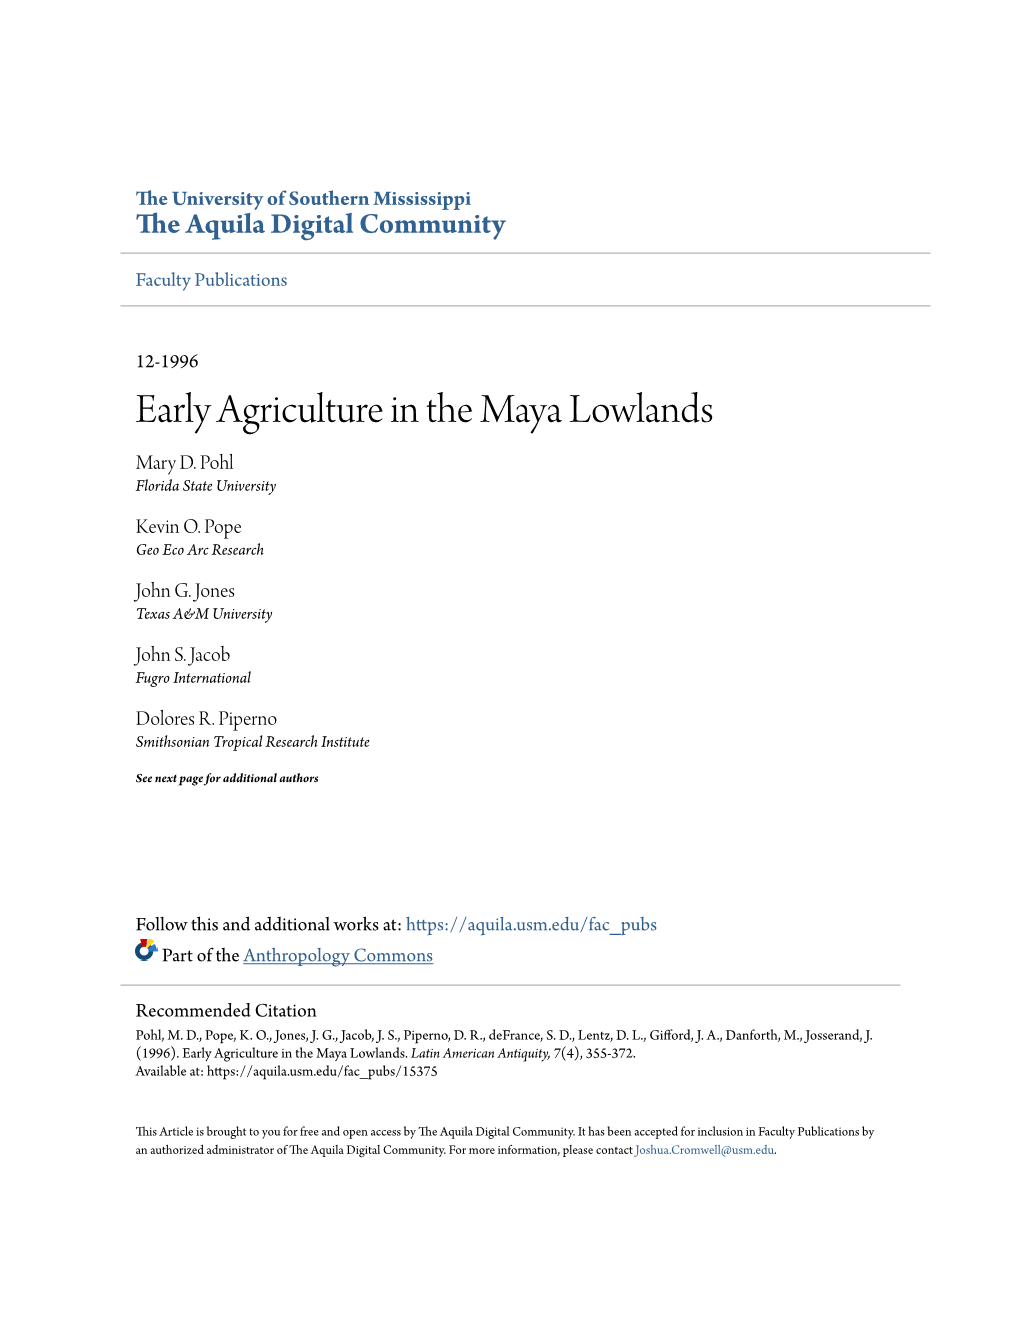 Early Agriculture in the Maya Lowlands Mary D